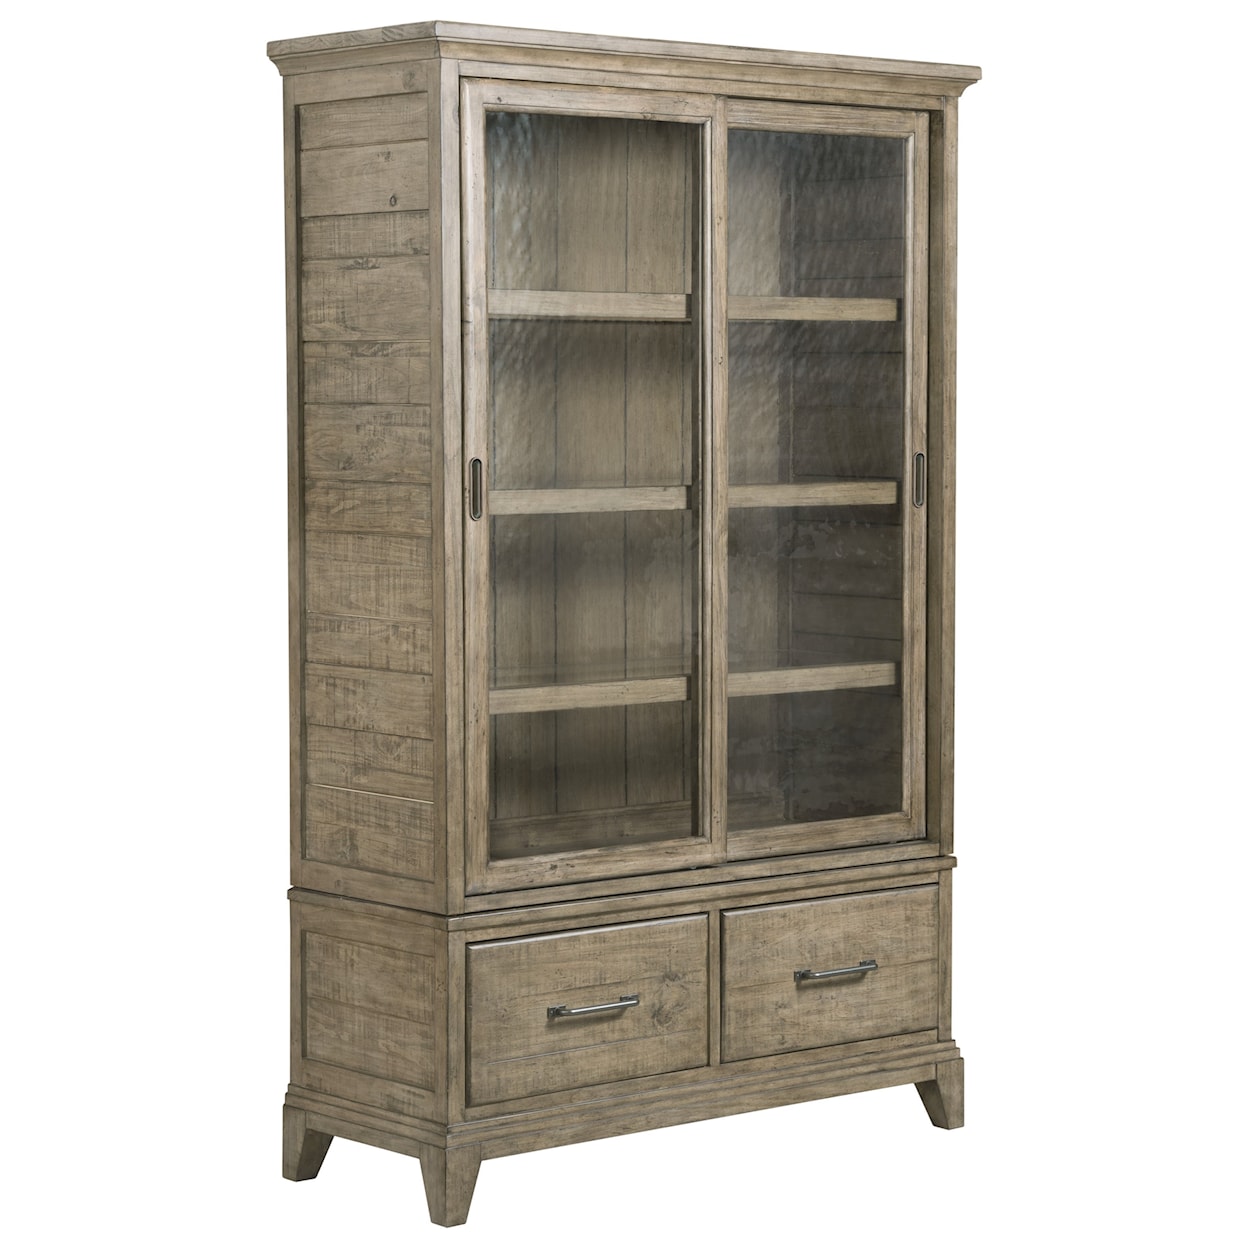 Kincaid Furniture Plank Road Darby Display Cabinet